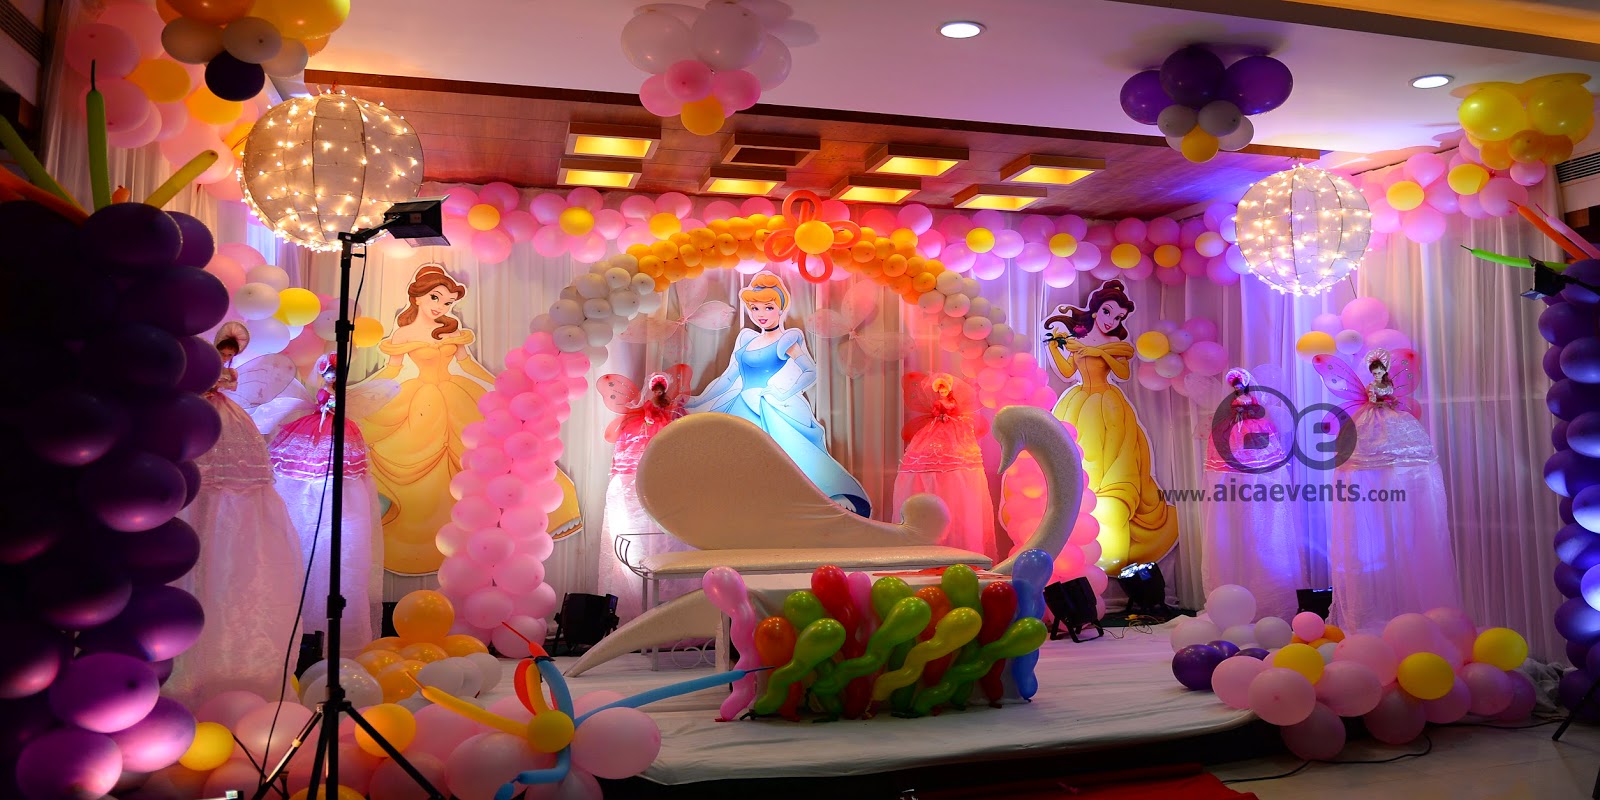 Aicaevents India  Barbie theme decorations  by AICA events